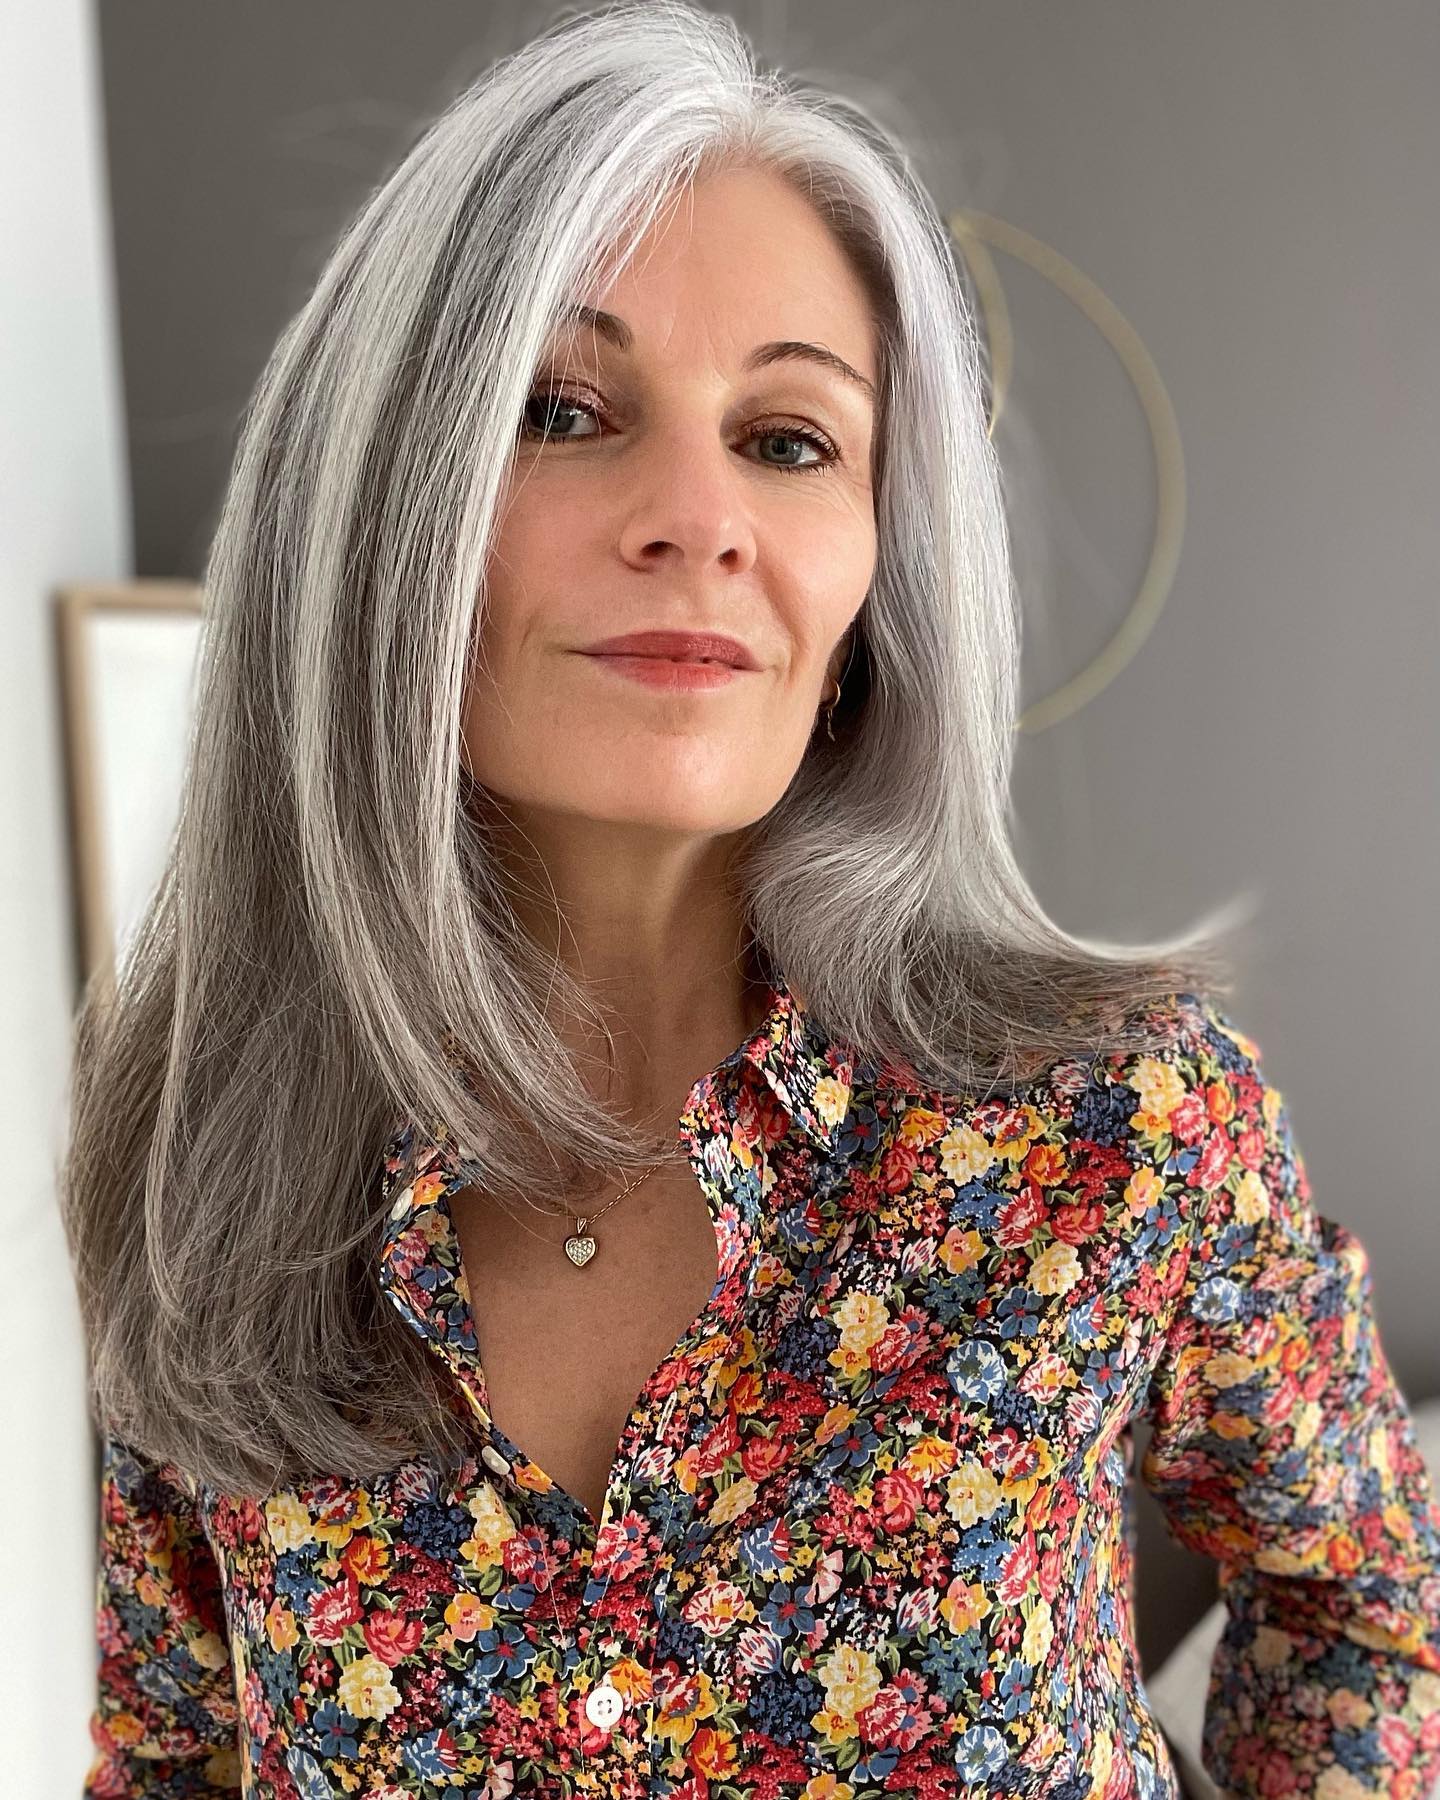 hairstyles for women over 50 22 Hairstyles for 50 year old woman with long hair | Hairstyles for women over 50 with fine hair | Medium length hairstyles for women over 50 Hairstyles for women over 50